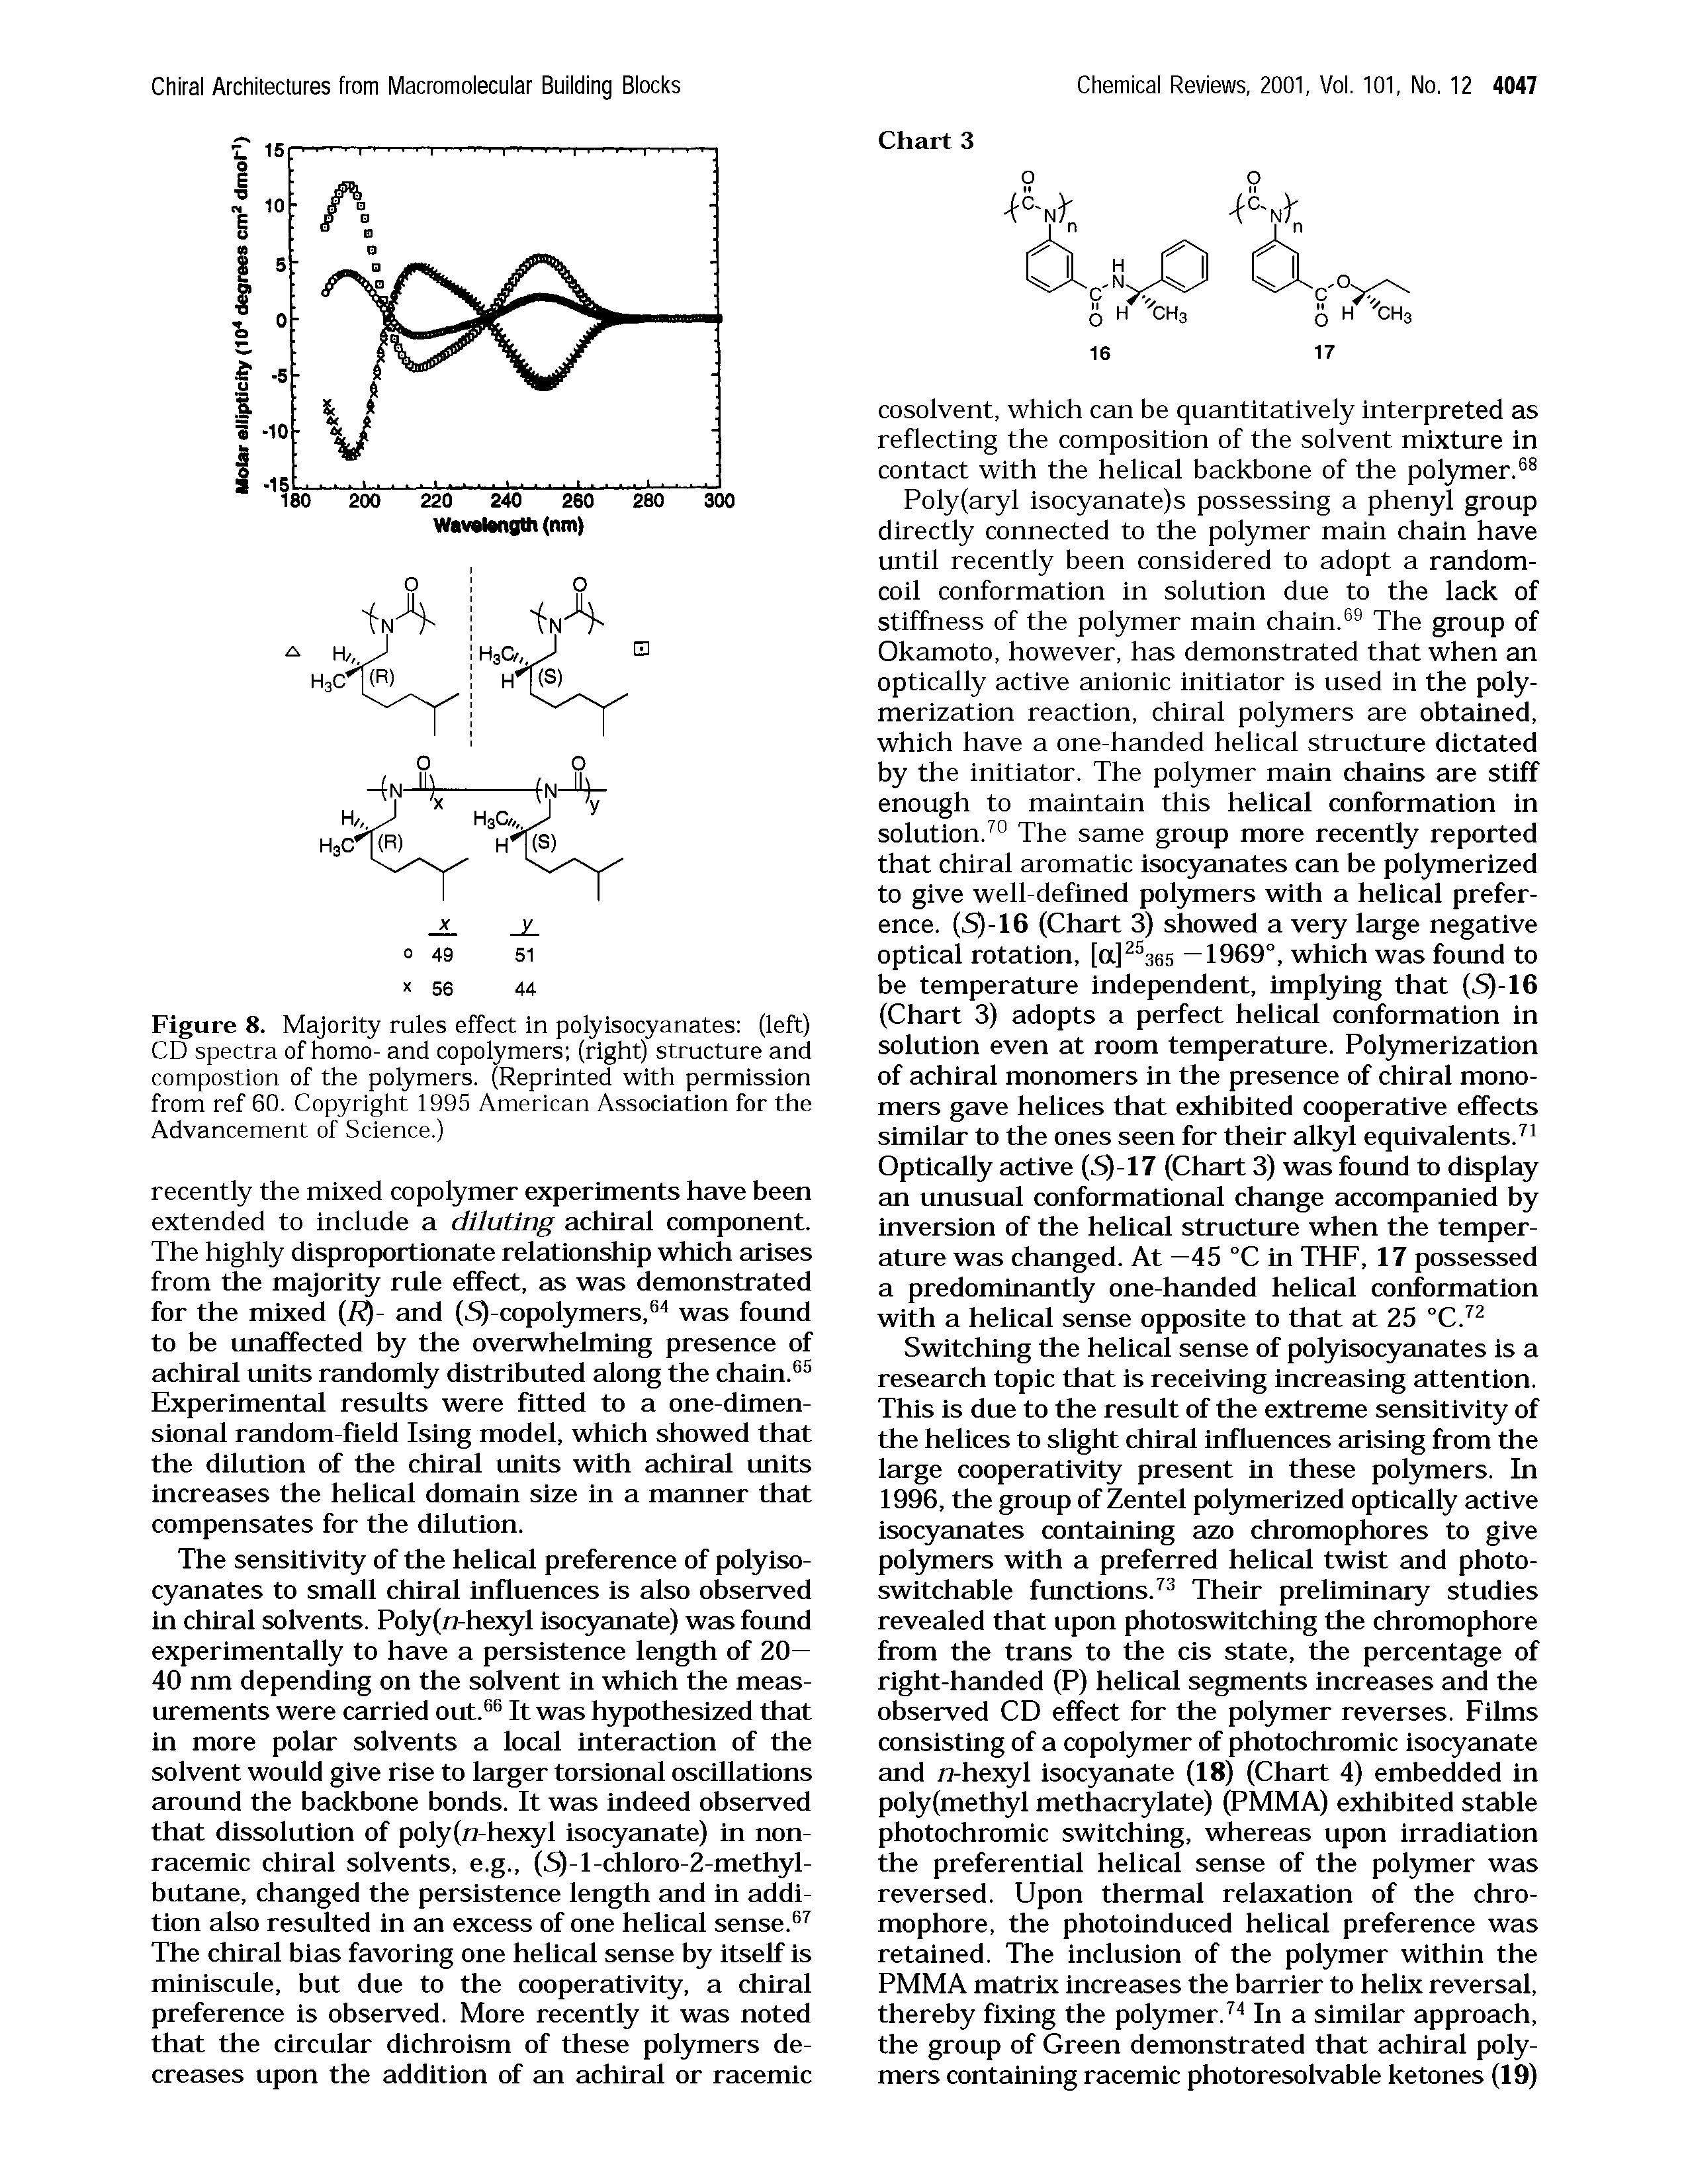 Figure 8. Majority rules effect in polyisocyanates (left) CD spectra of homo- and copolymers (right) structure and compostion of the polymers. (Reprinted with permission from ref 60. Copyright 1995 American Association for the Advancement of Science.)...